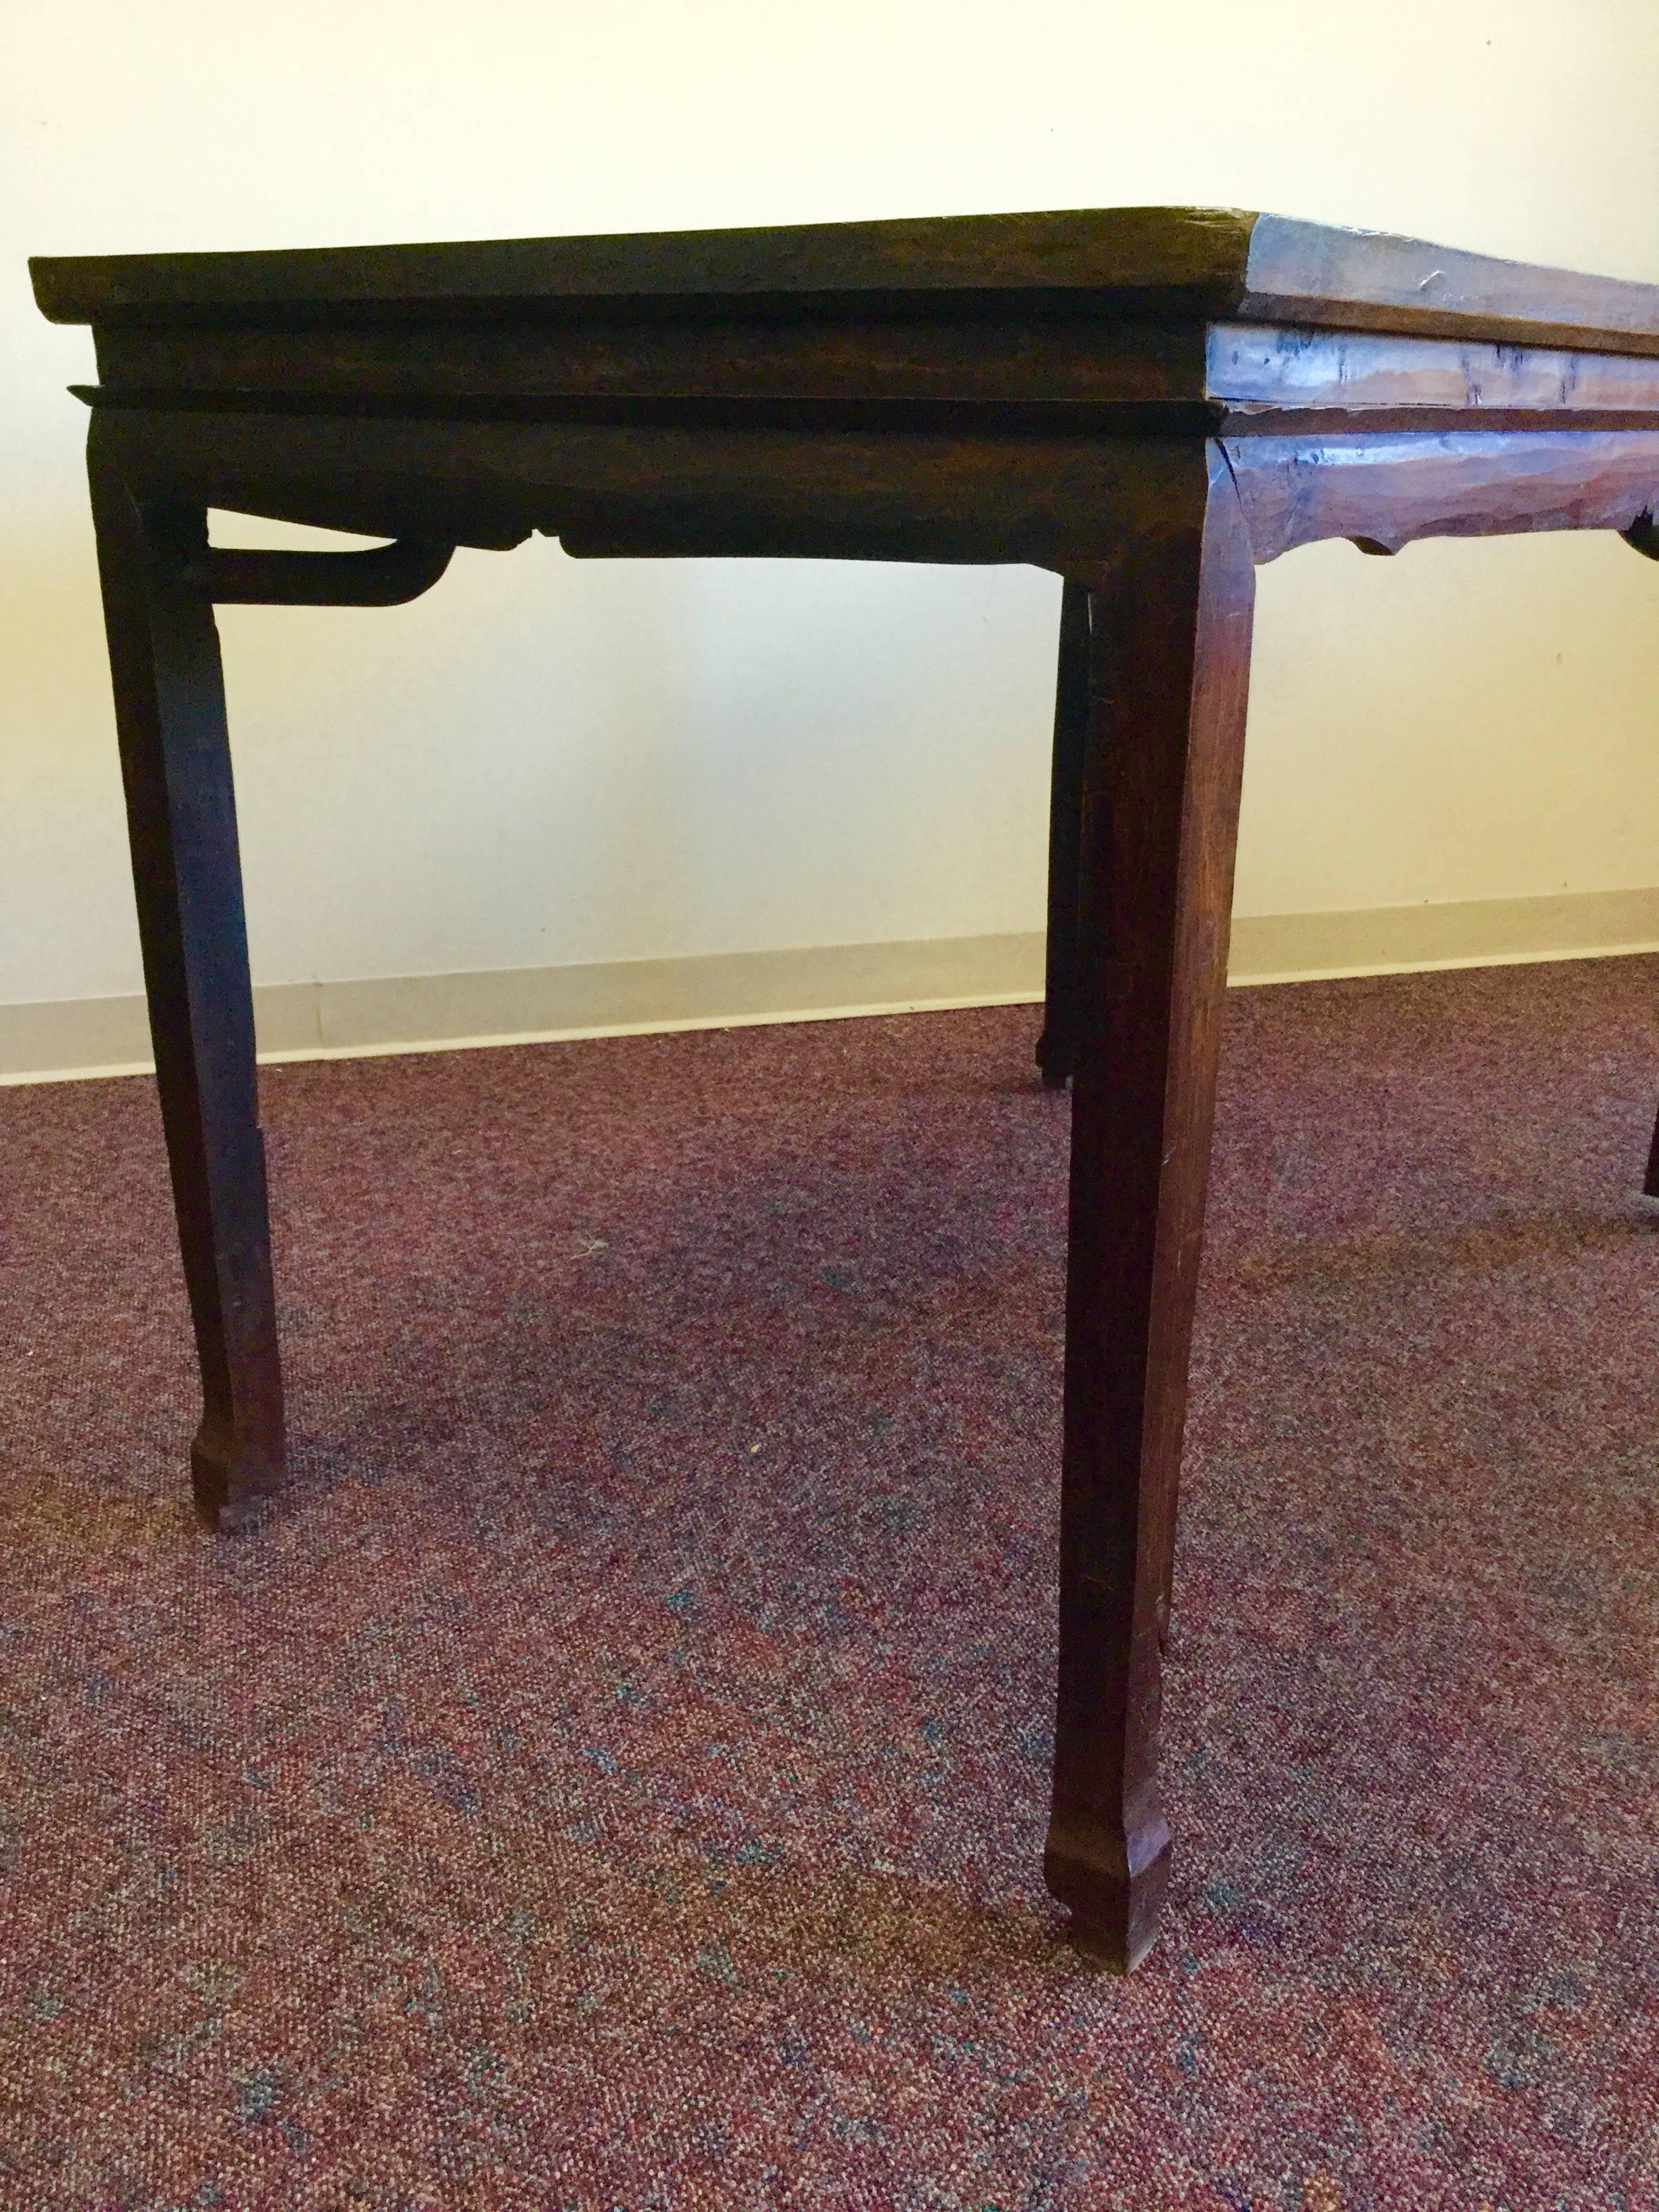 Exceptional 19th Century Painting Table In Good Condition For Sale In Santa Fe, NM